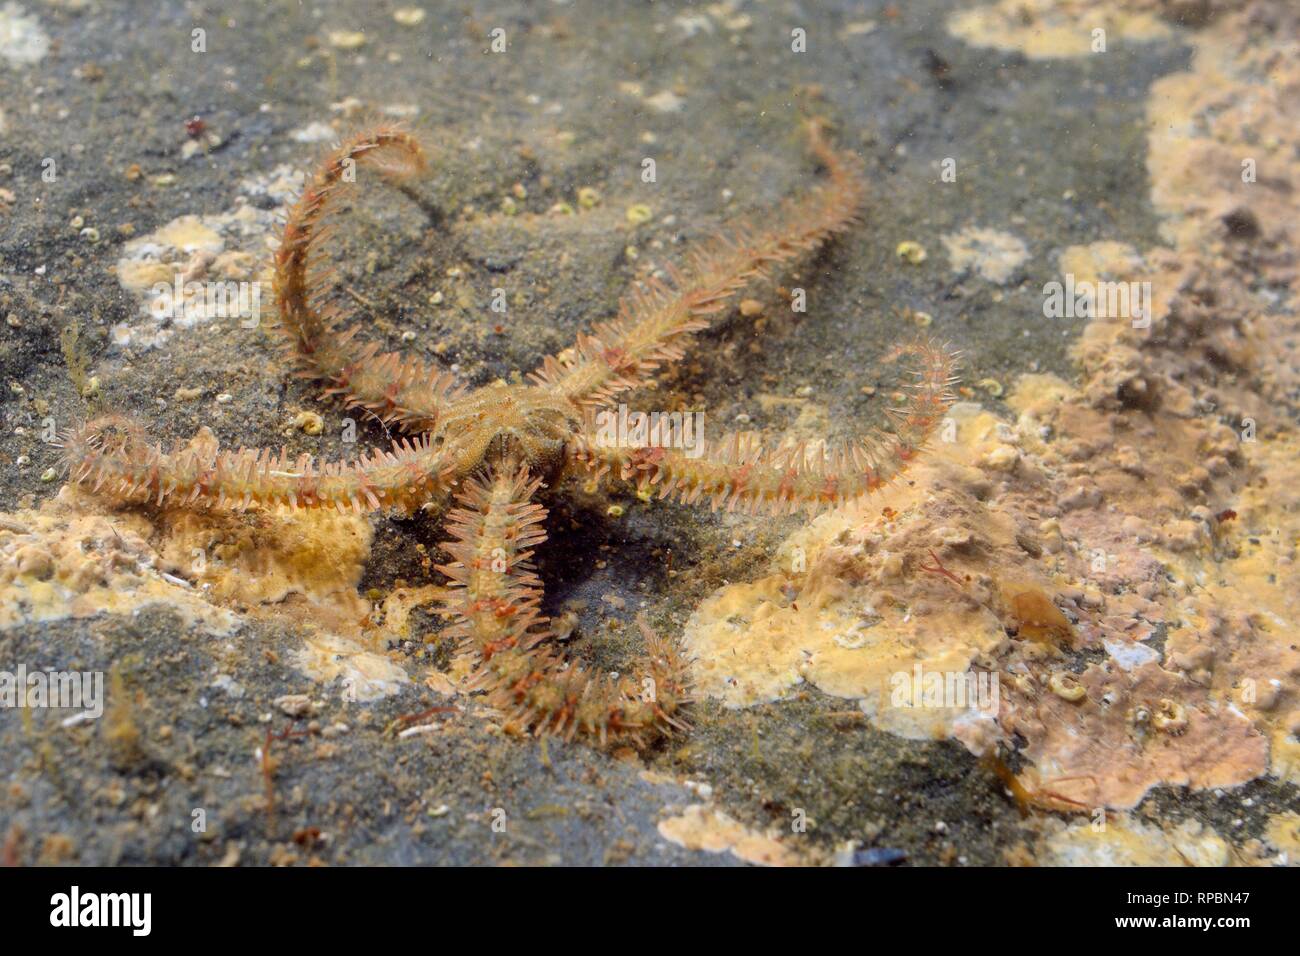 Common brittle star (Ophiothrix fragilis) moving over floor of a rockpool encrusted with red algae low on a rocky shore, near Falmouth, Cornwall, UK,  Stock Photo